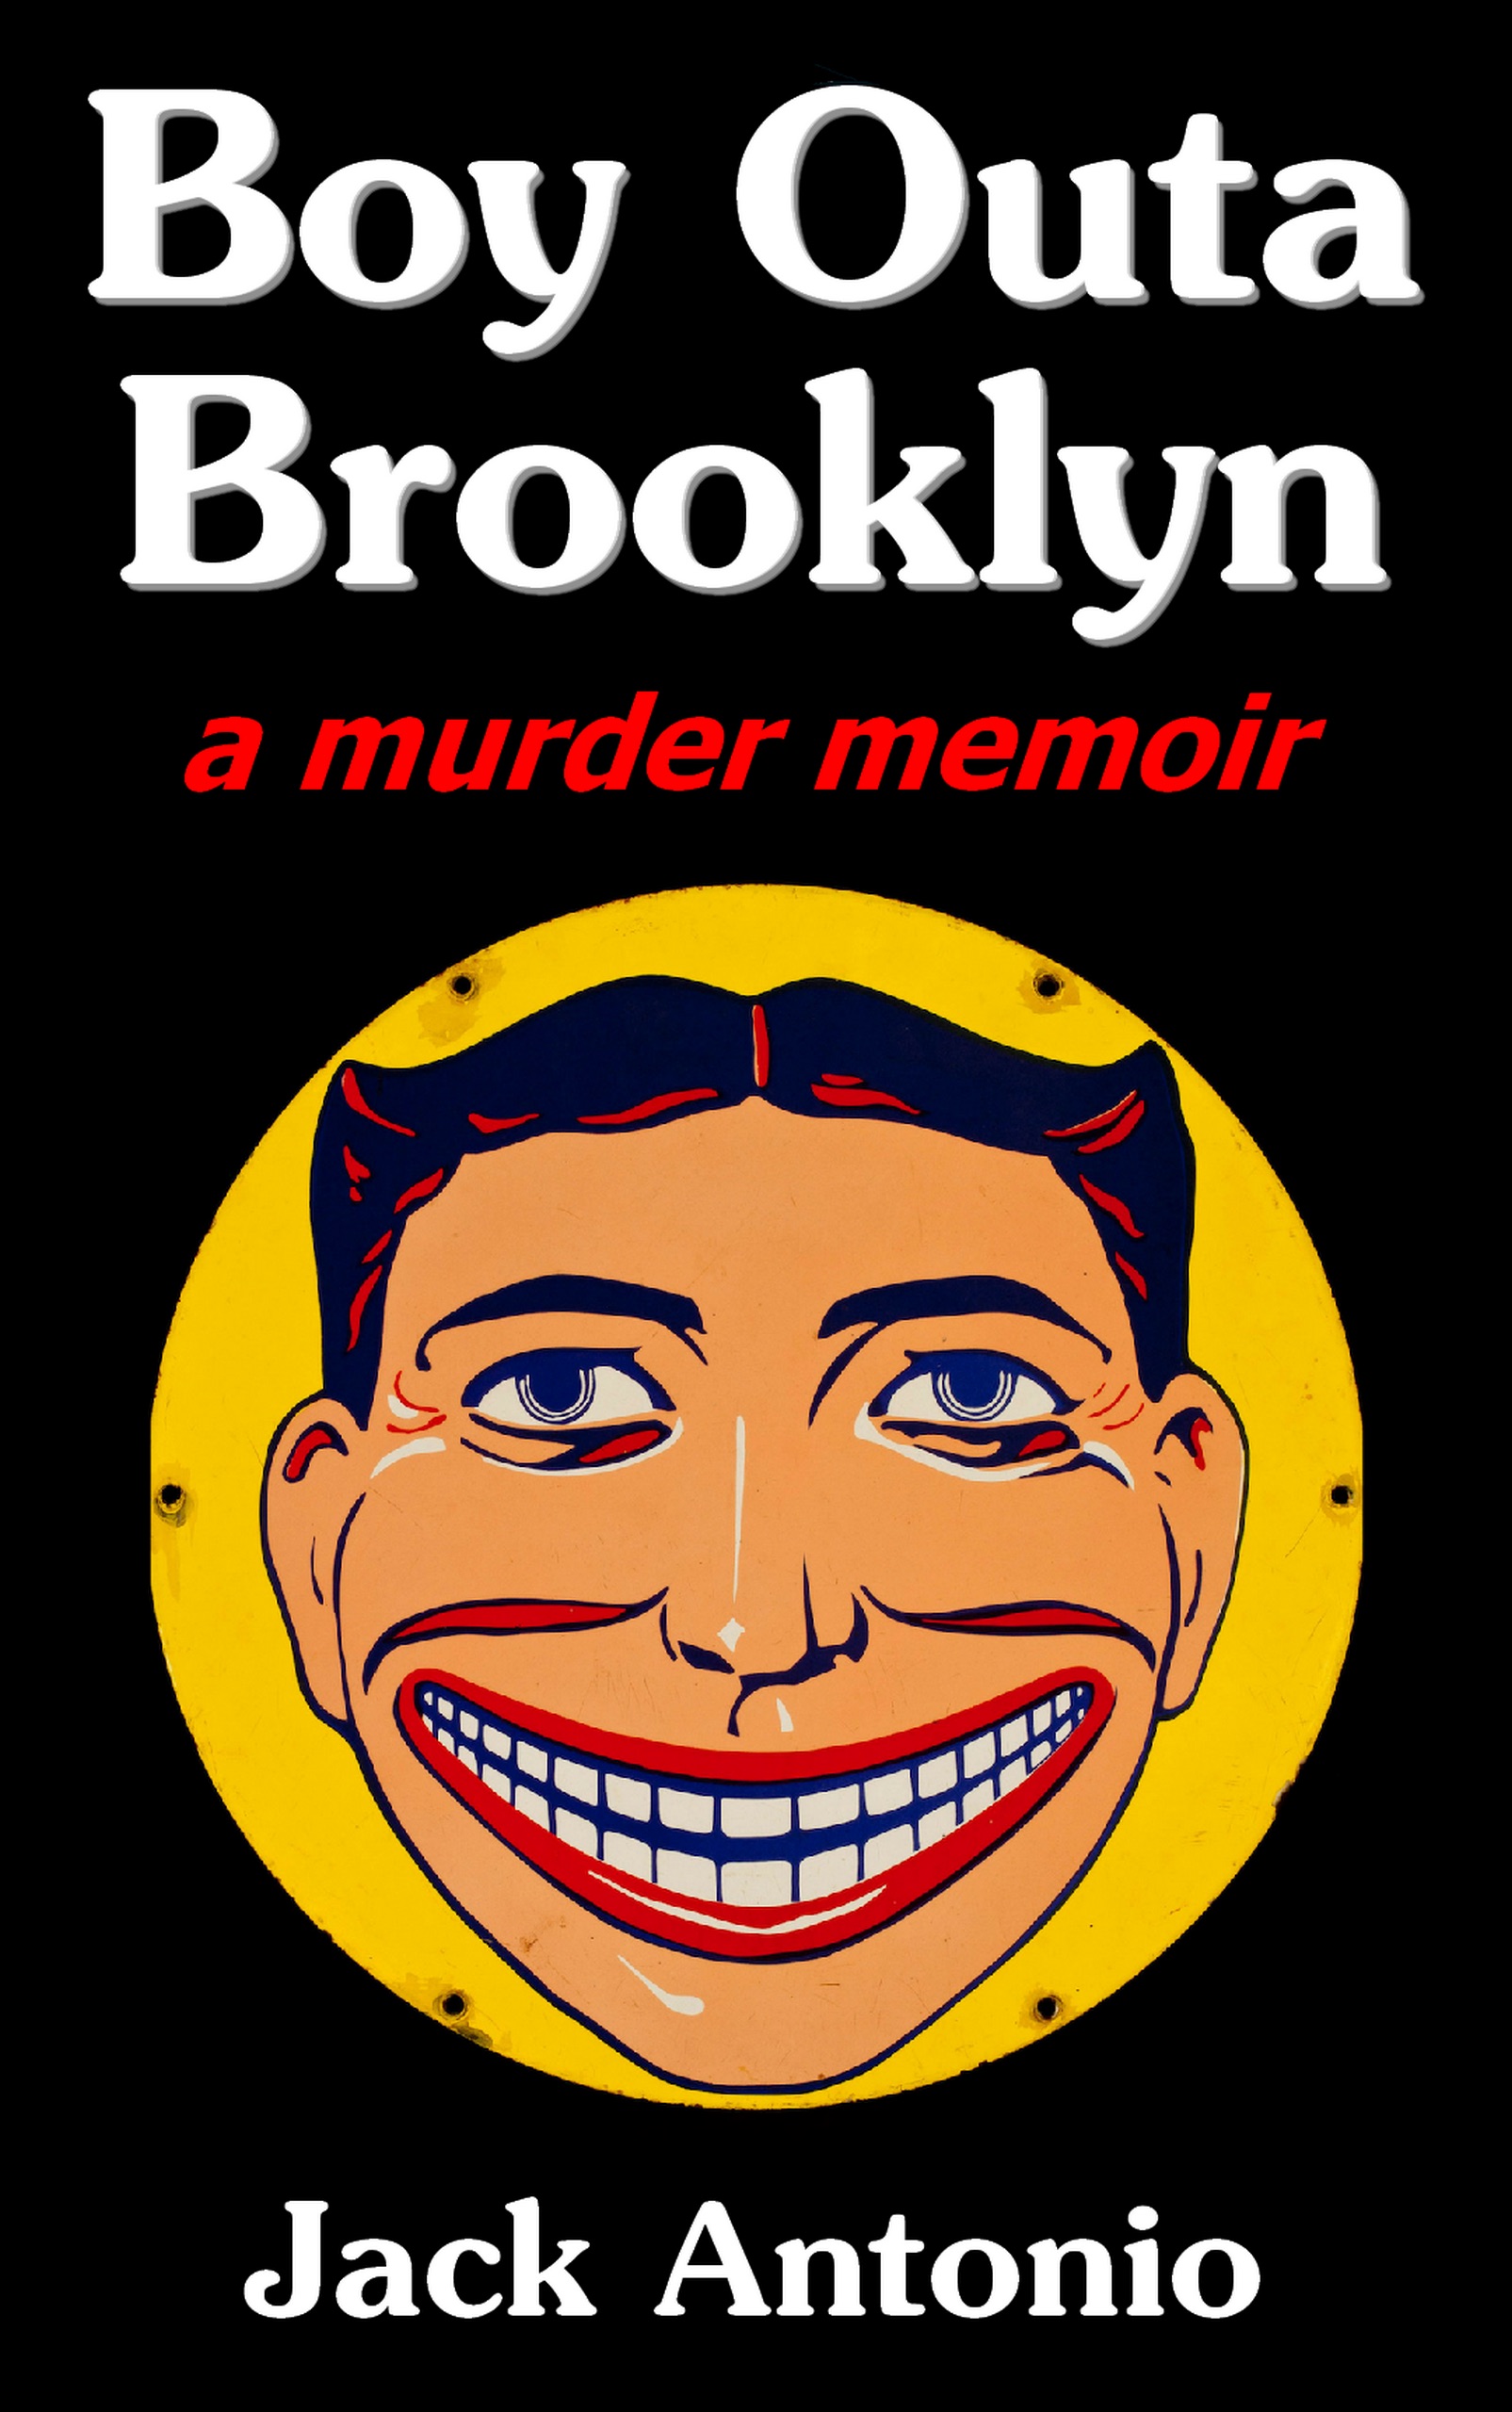 Boy Outa Brooklyn a murder memoir by Jack Antonio
Image: The smiling face of Steeplechase Park in Coney Island, Brooklyn. 